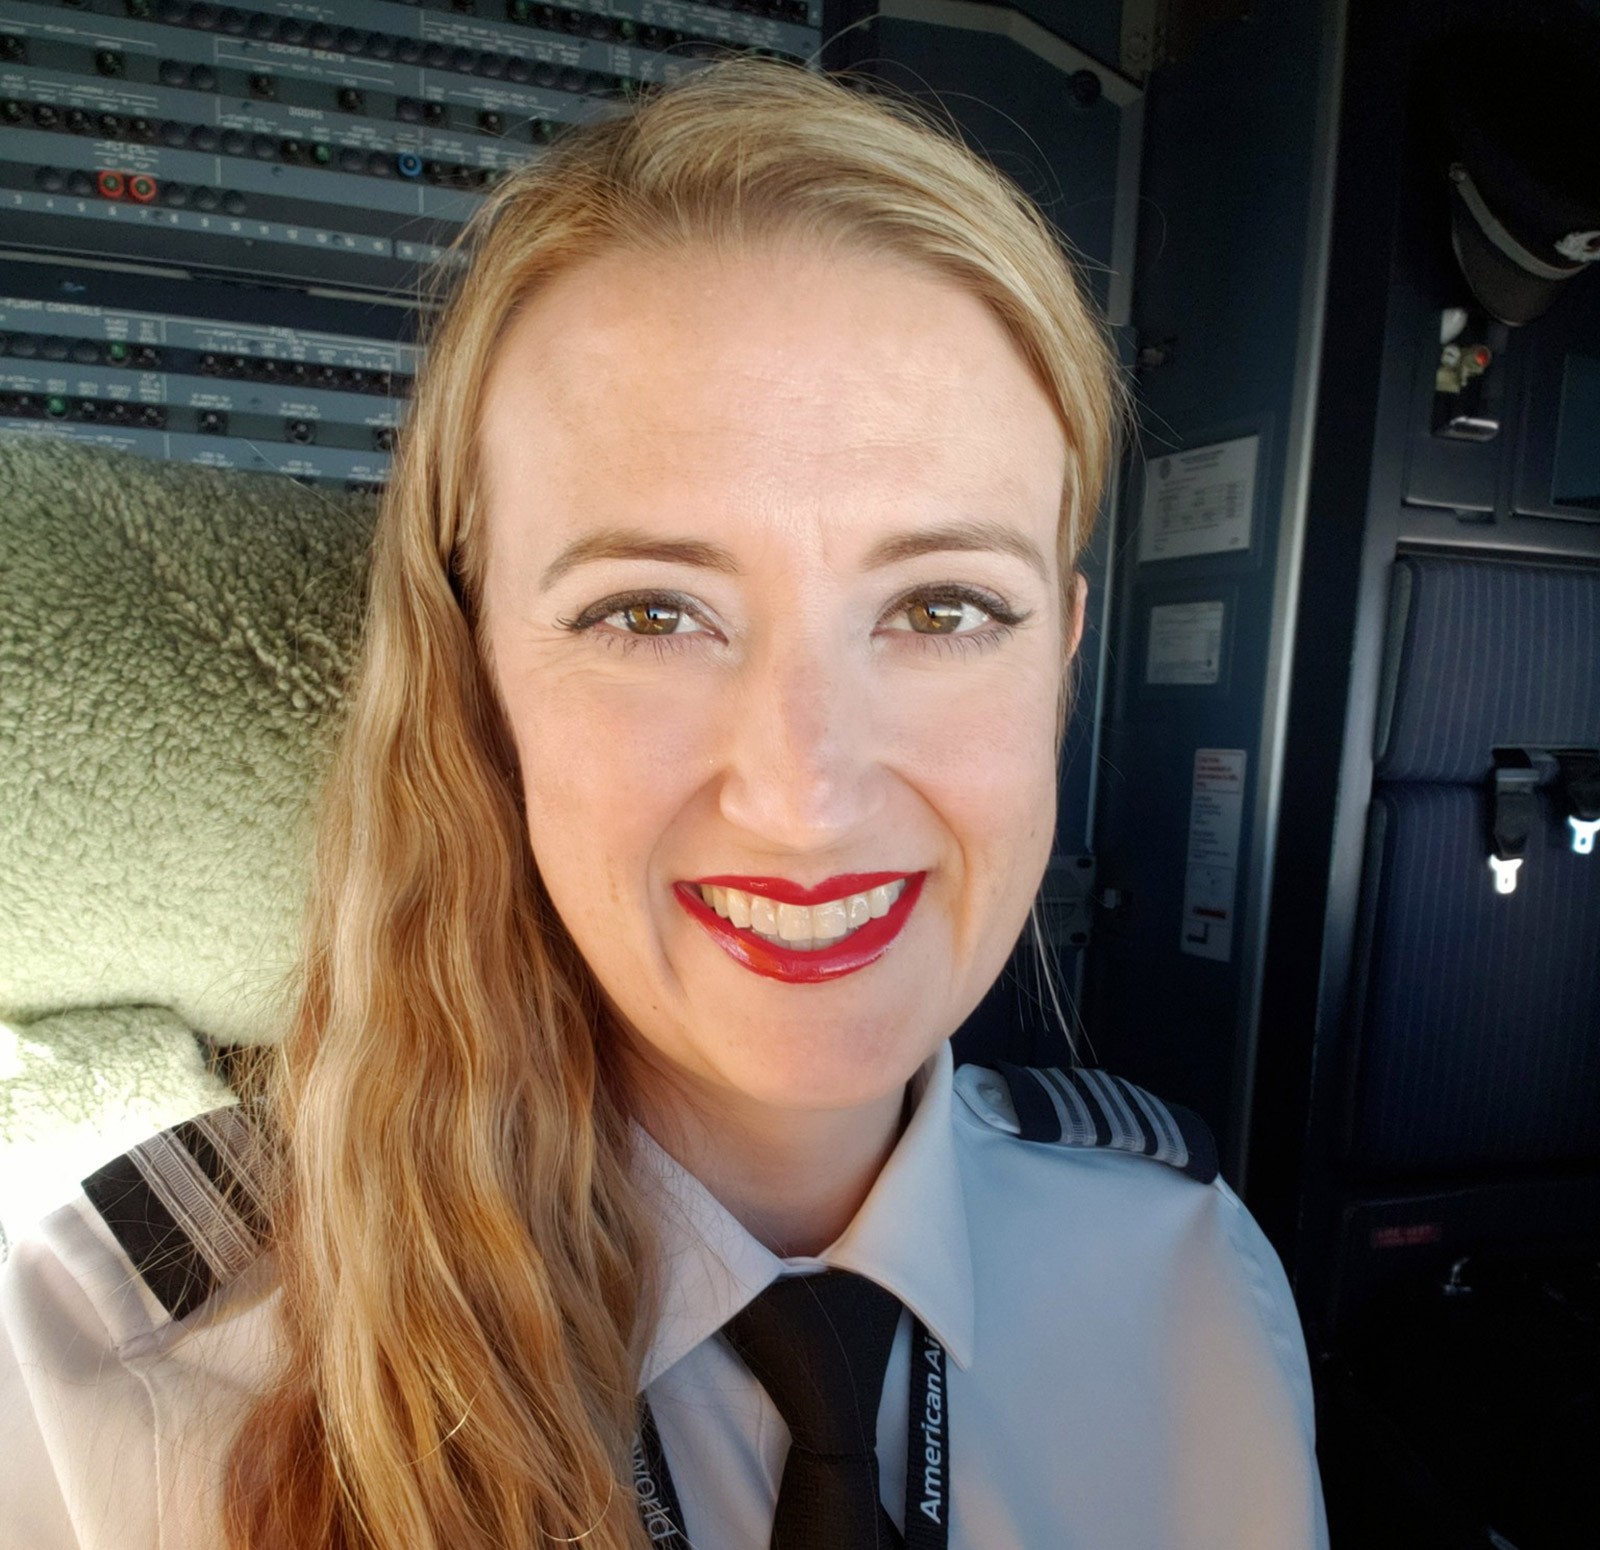 Women of USU: Then and Now, Women in Aviation